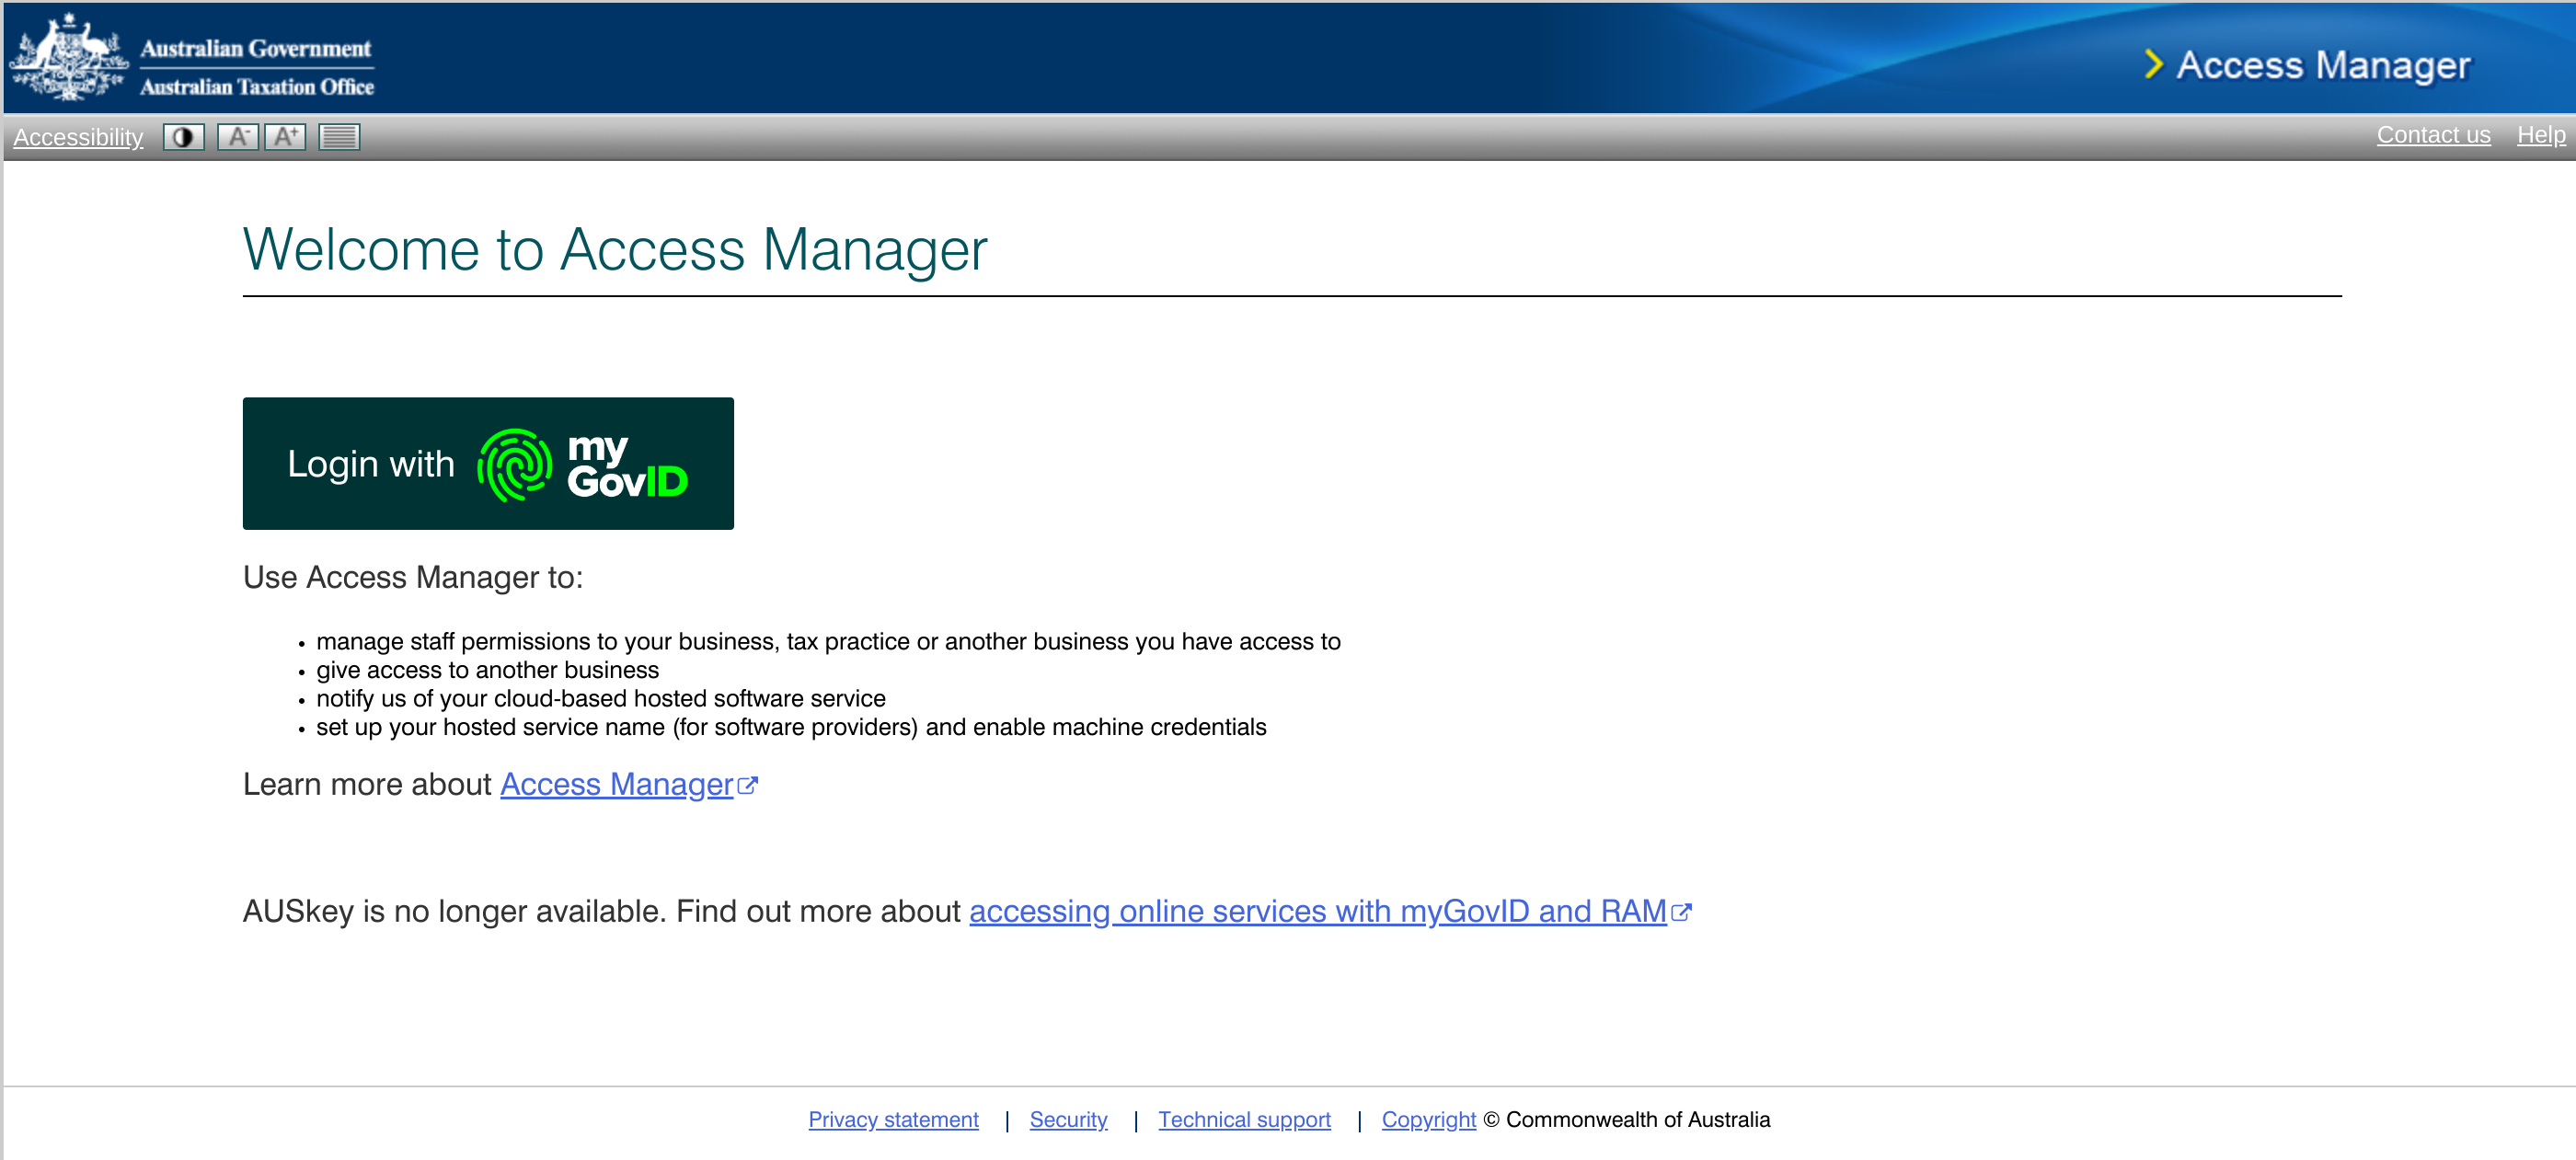 Step 1: Login to ATO Access Manager